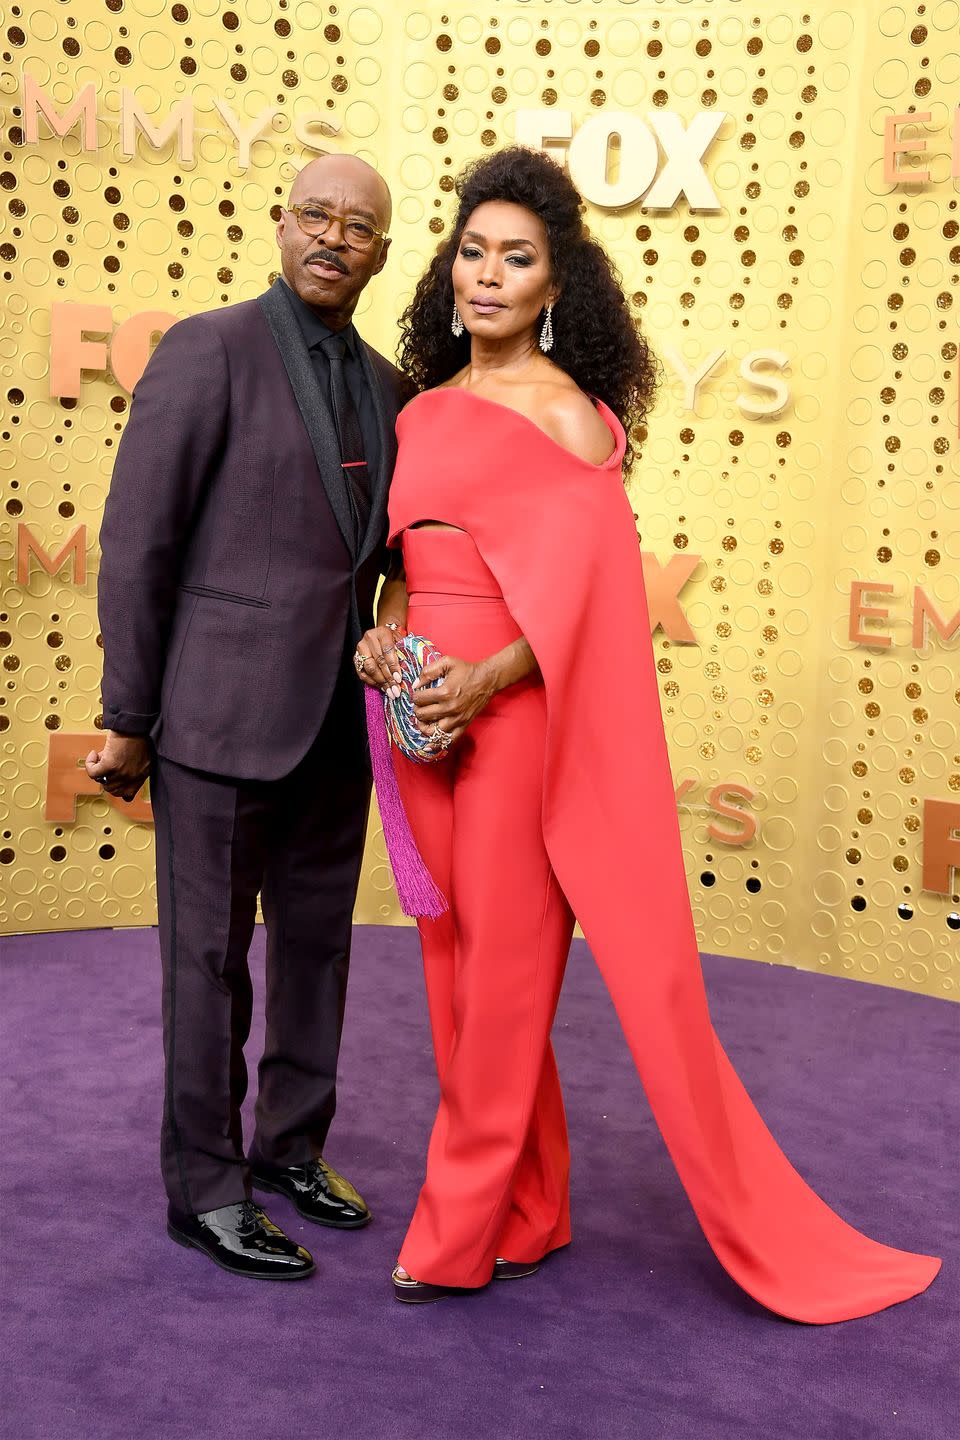 The Cutest Celebrity Couples at the 2019 Emmys